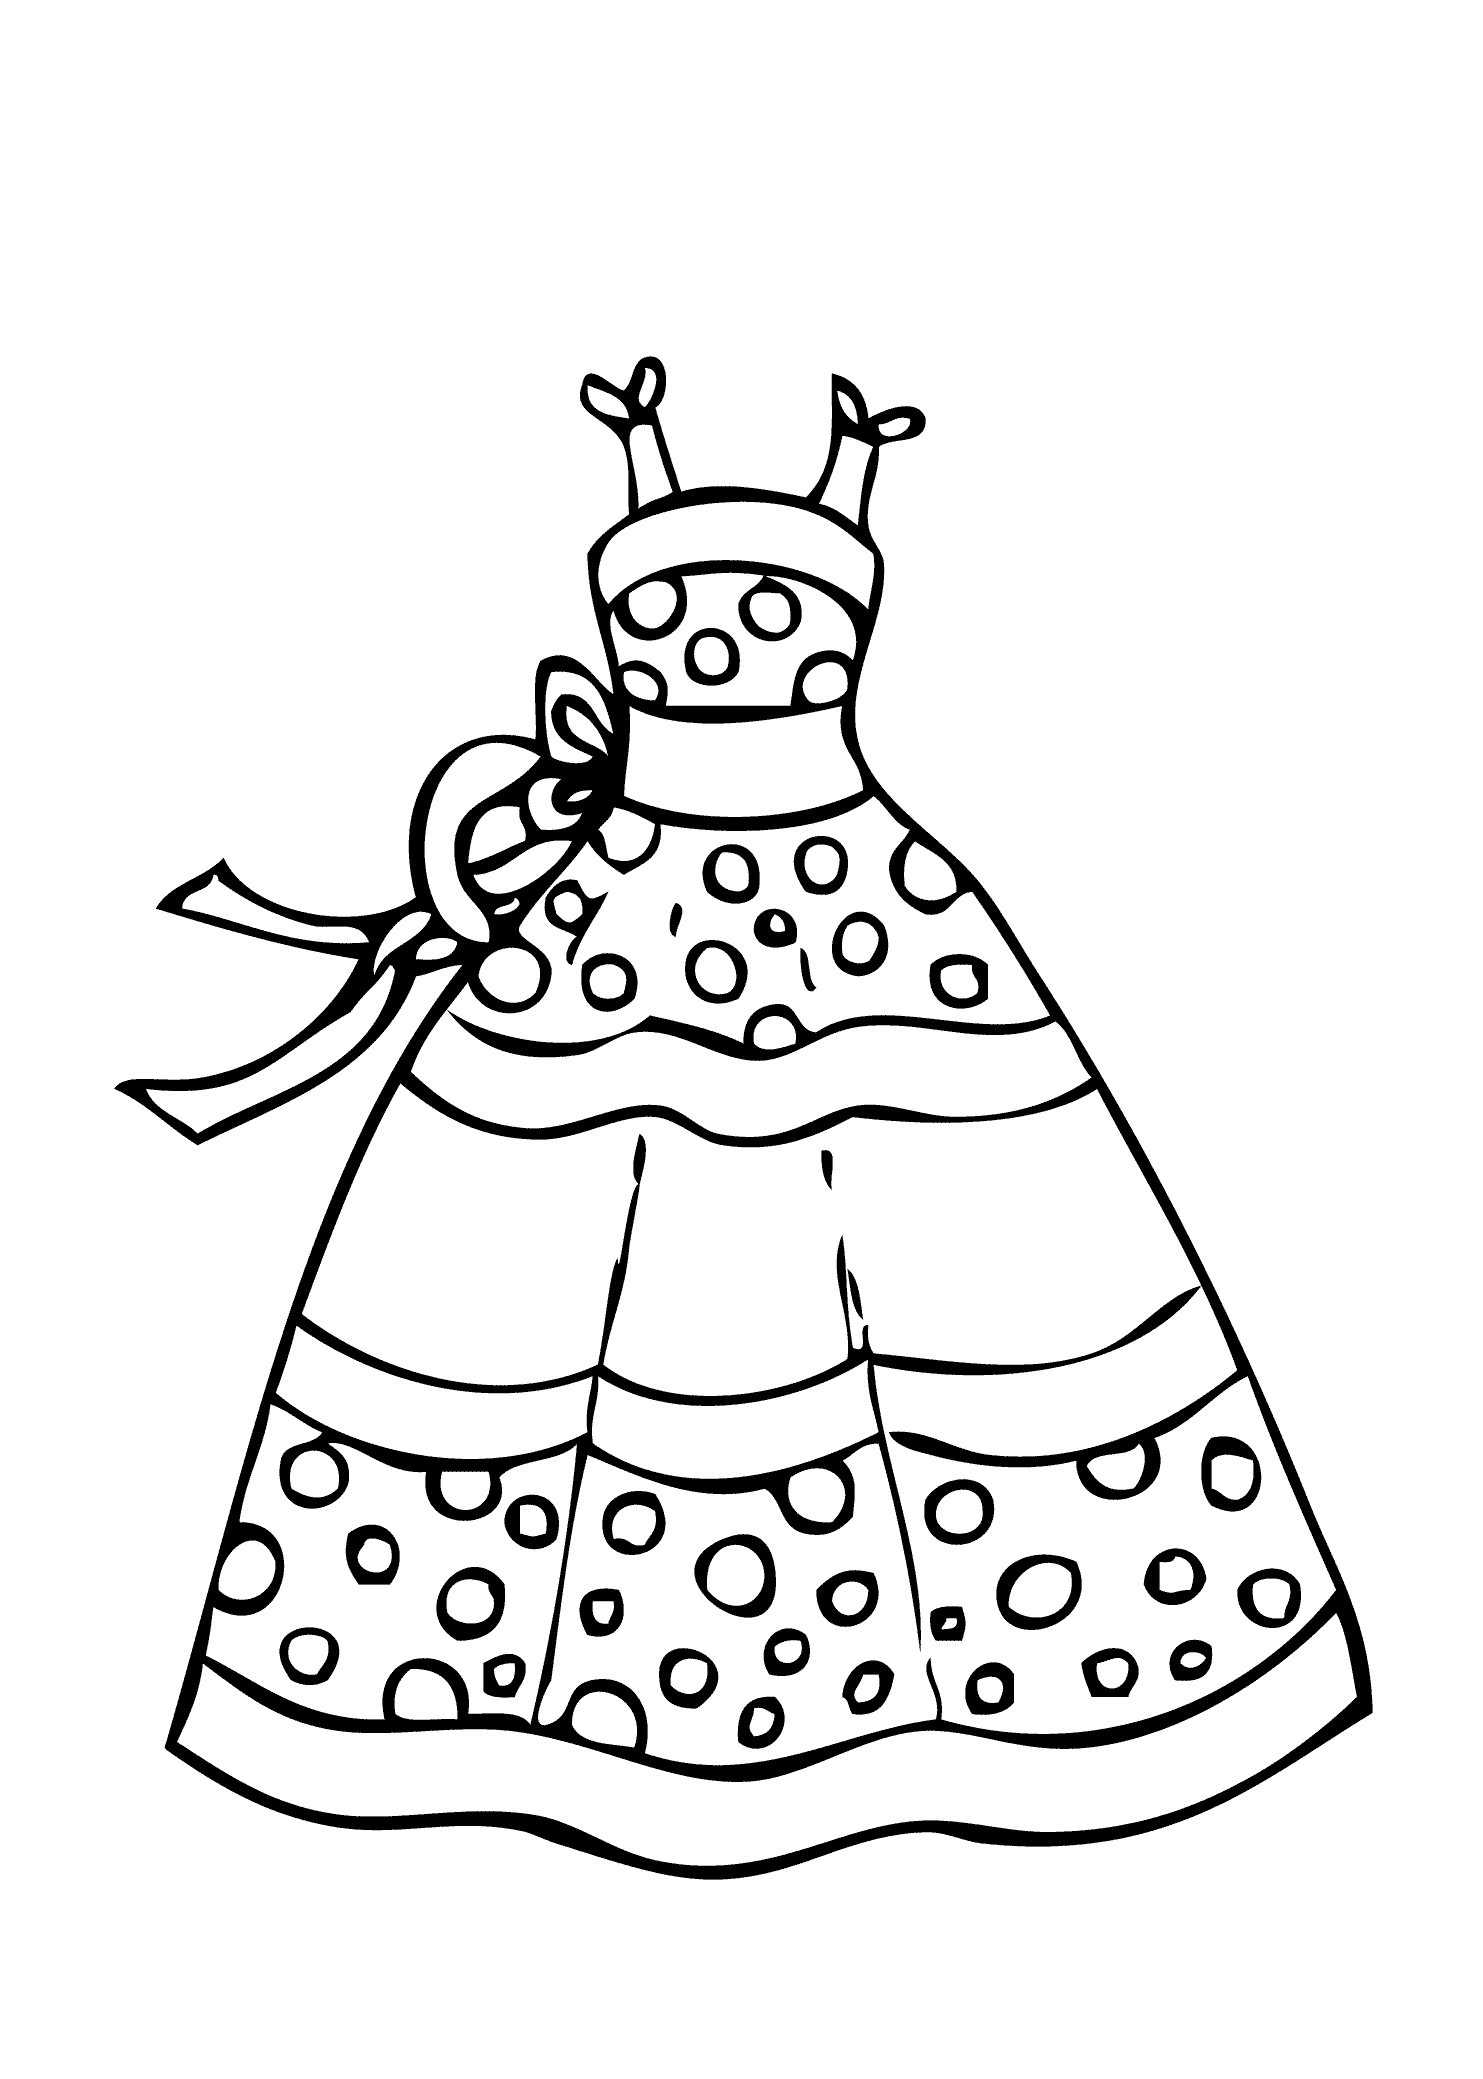 Clothing Coloring Page Printable - Coloring Pages For All Ages